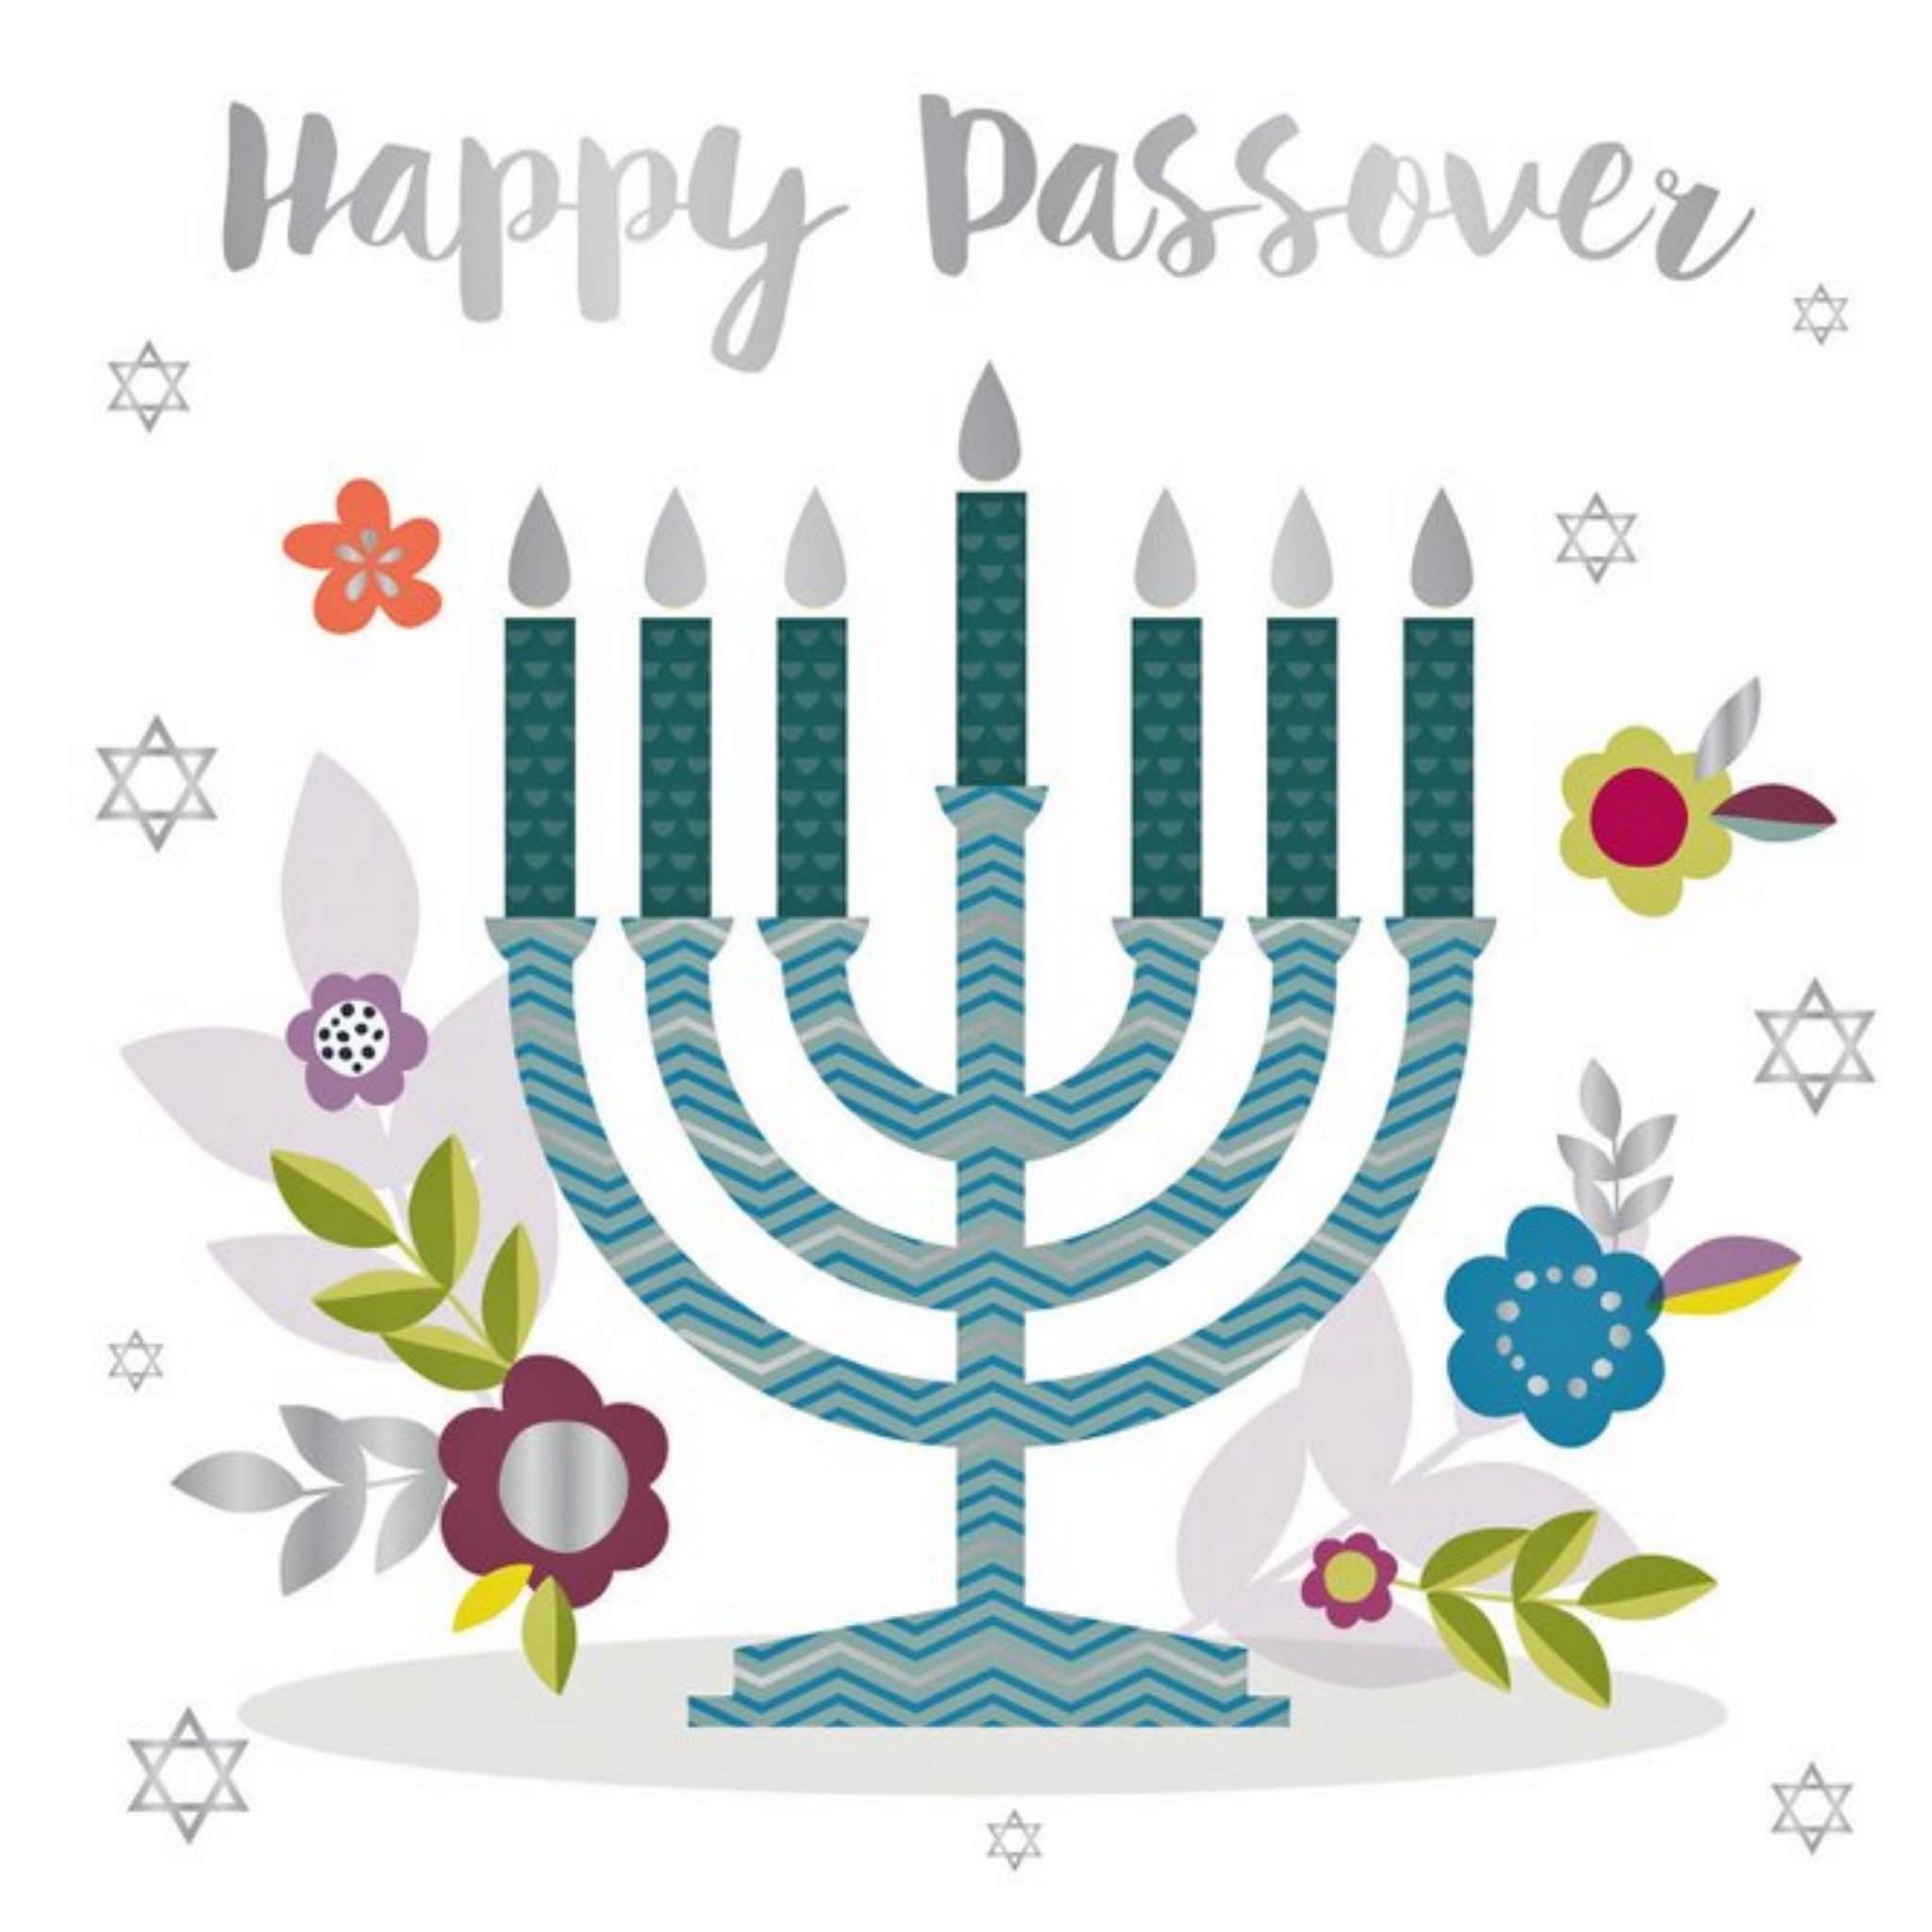 Moonpig Happy Passover Candles Card, Large